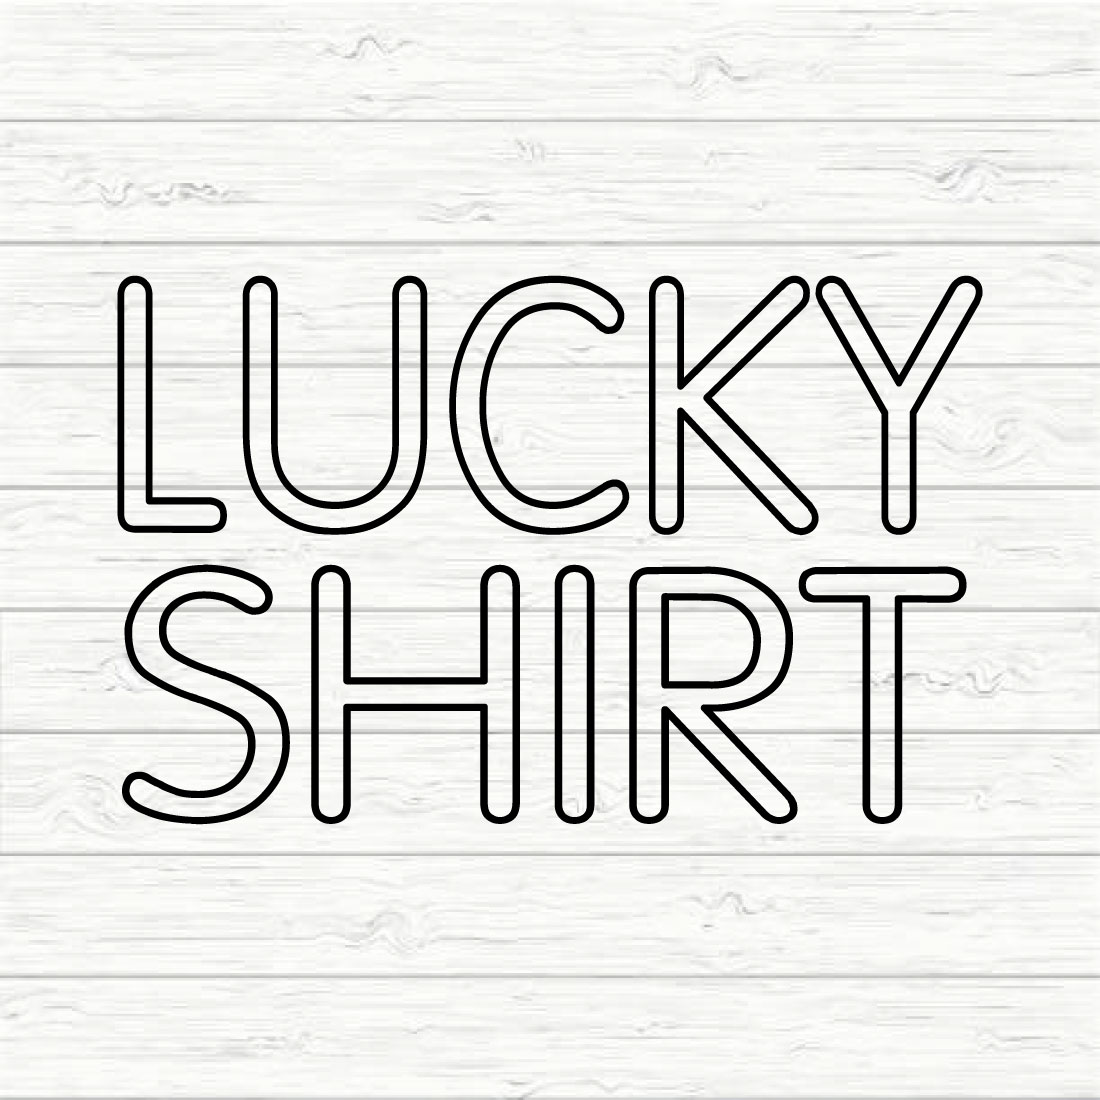 Lucky Shirt preview image.